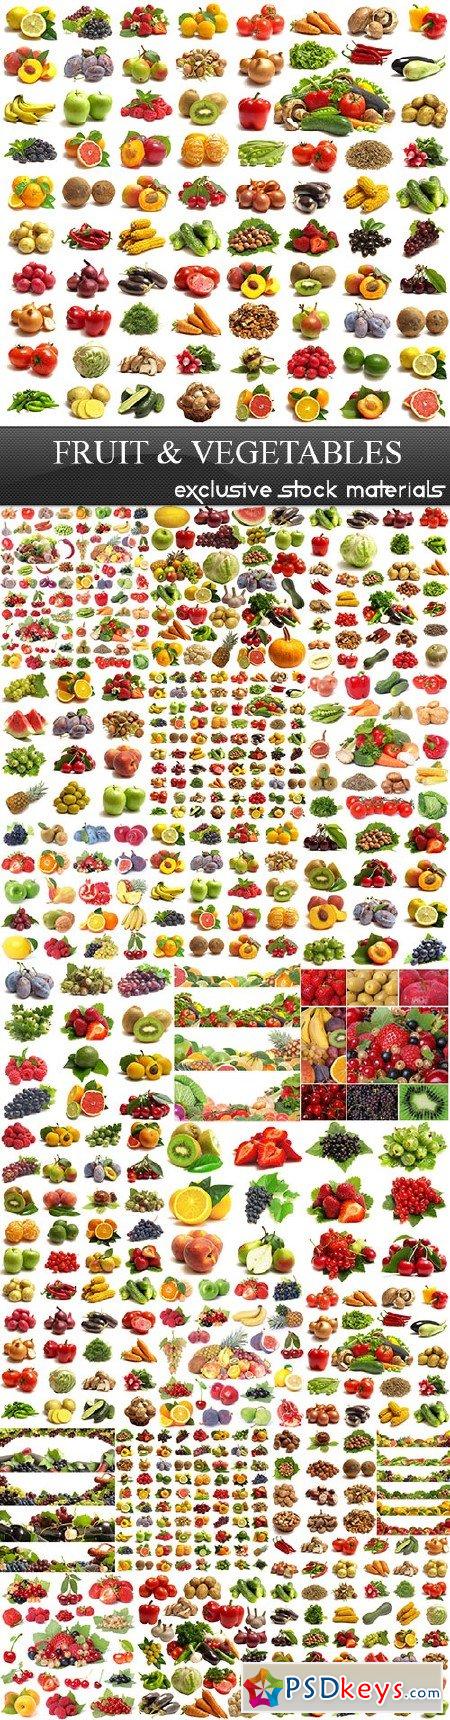 Fruit and Vegetables 25xUHQ JPEG